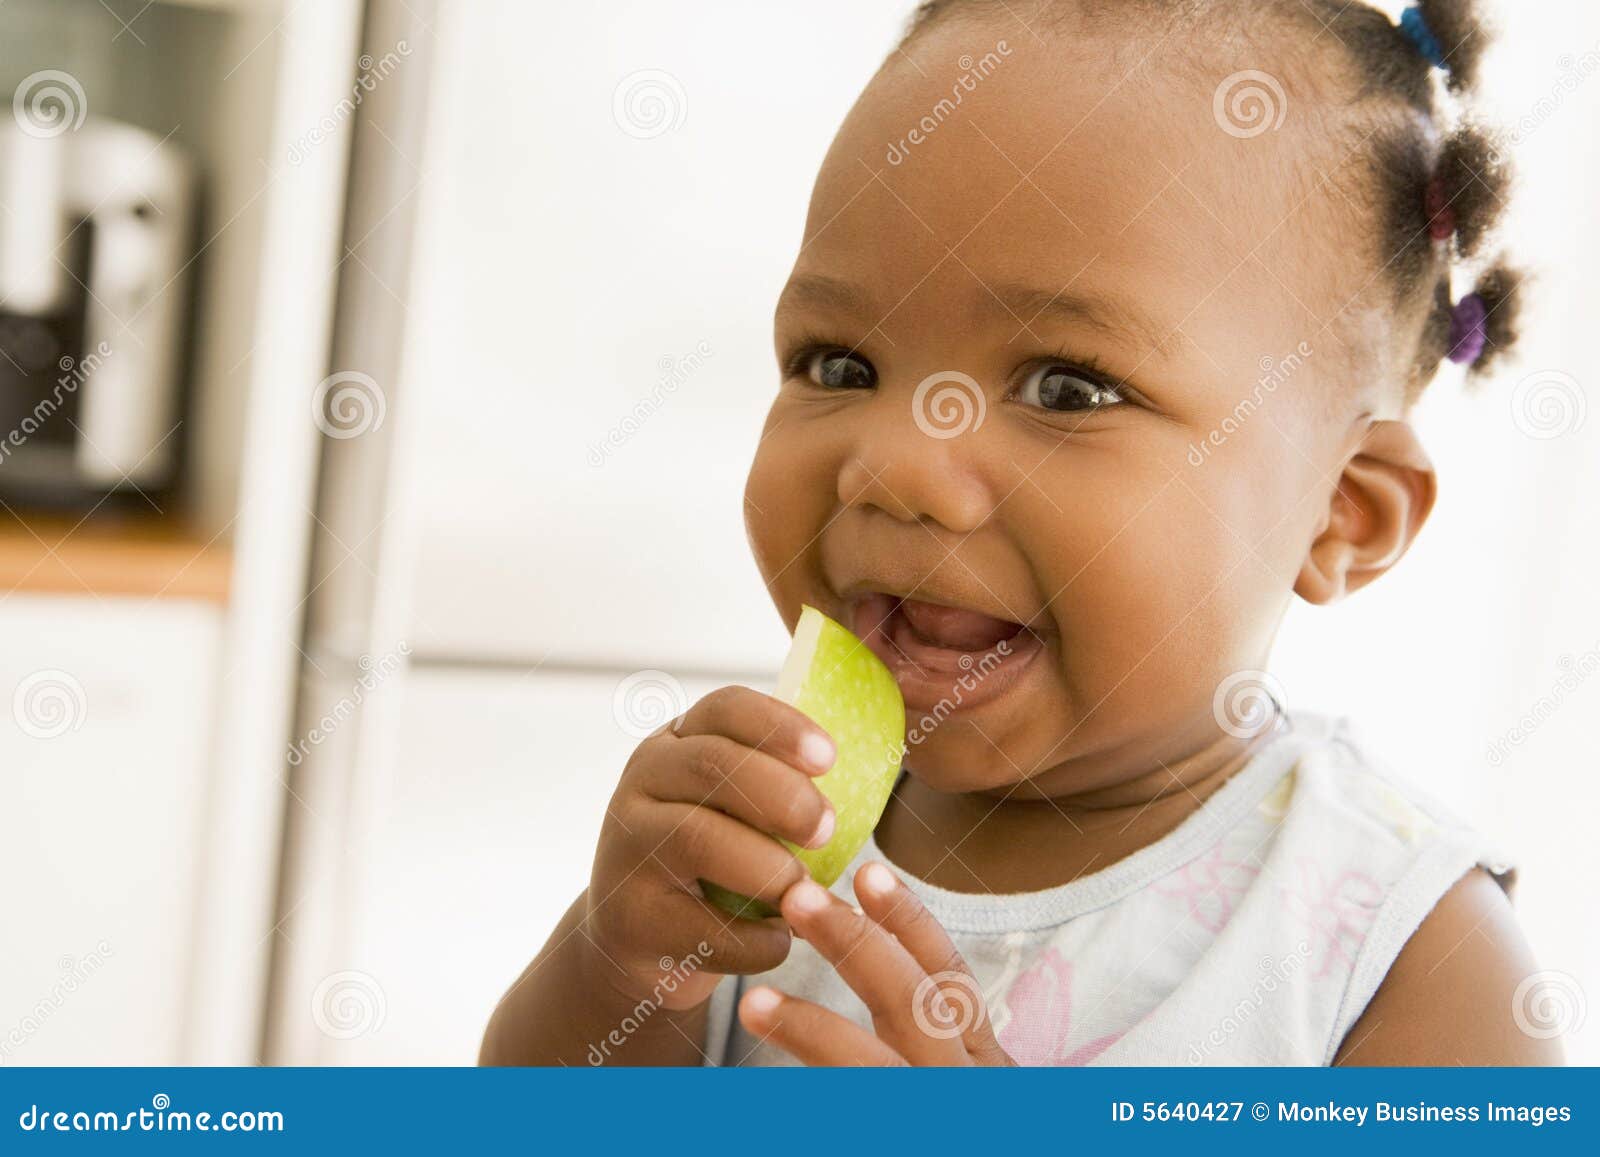 young girl eating apple indoors